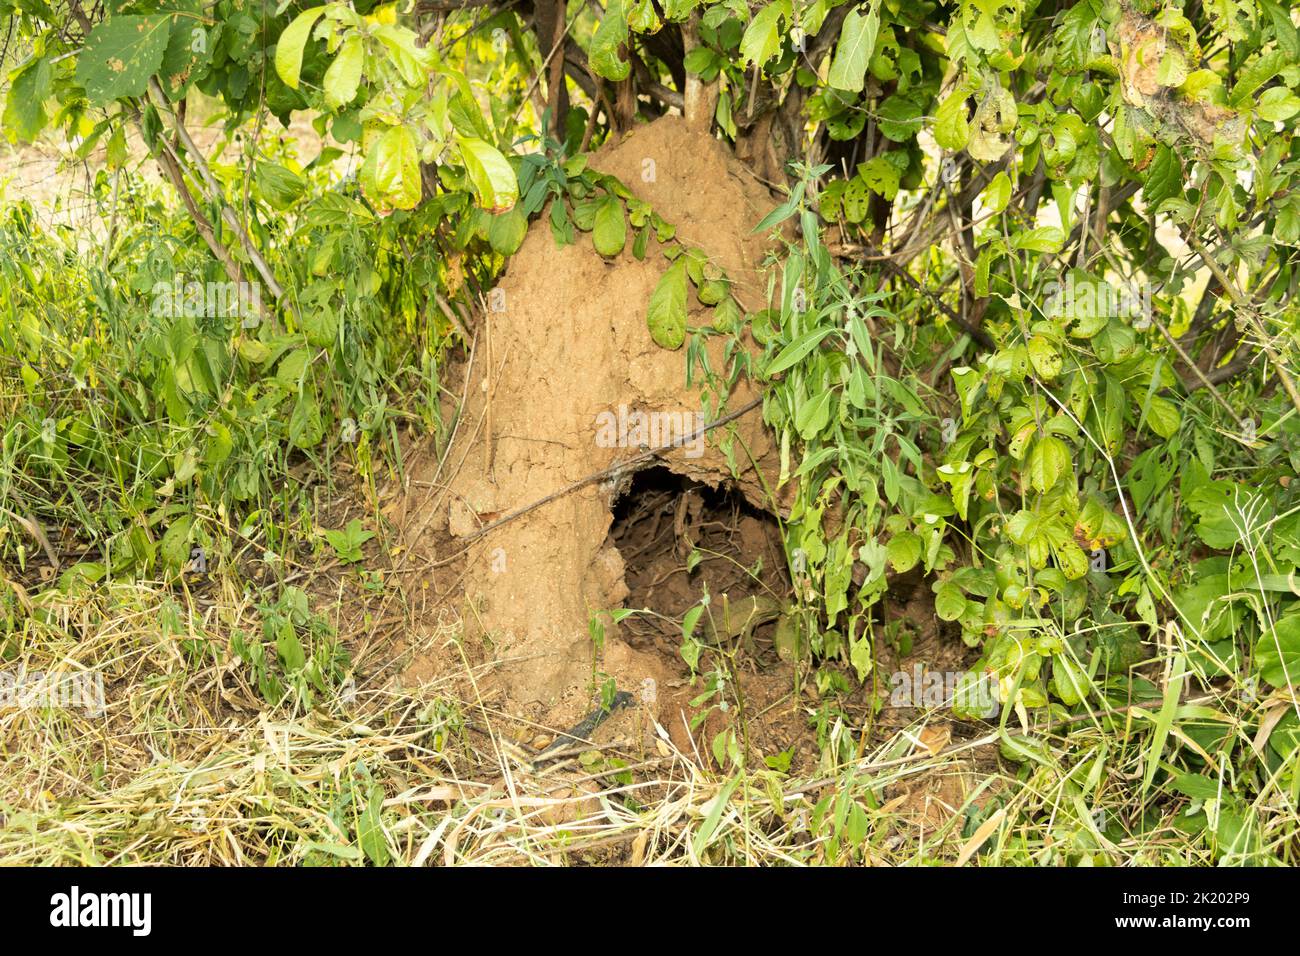 The mound of a termite colony has been ripped open by an Aardvark with its powerful front claws in its quest to feed on the termites inside. Stock Photo